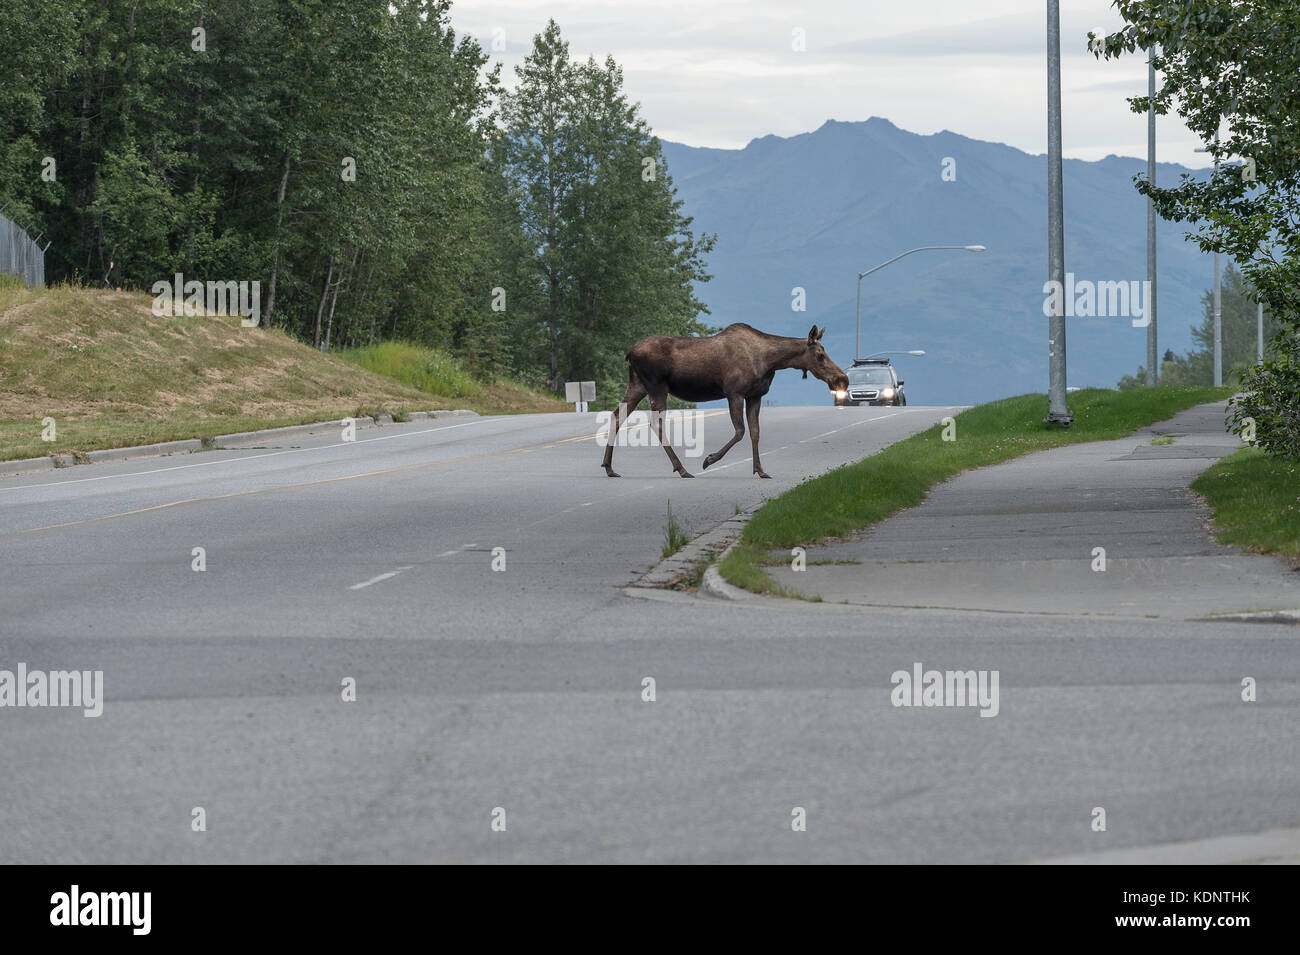 ANCHORAGE, ALASKA AUGUST 9 2017: A Moose is crossing the road, oblivious to oncoming traffic.  Regular signs in the area warn motorists to take extrem Stock Photo